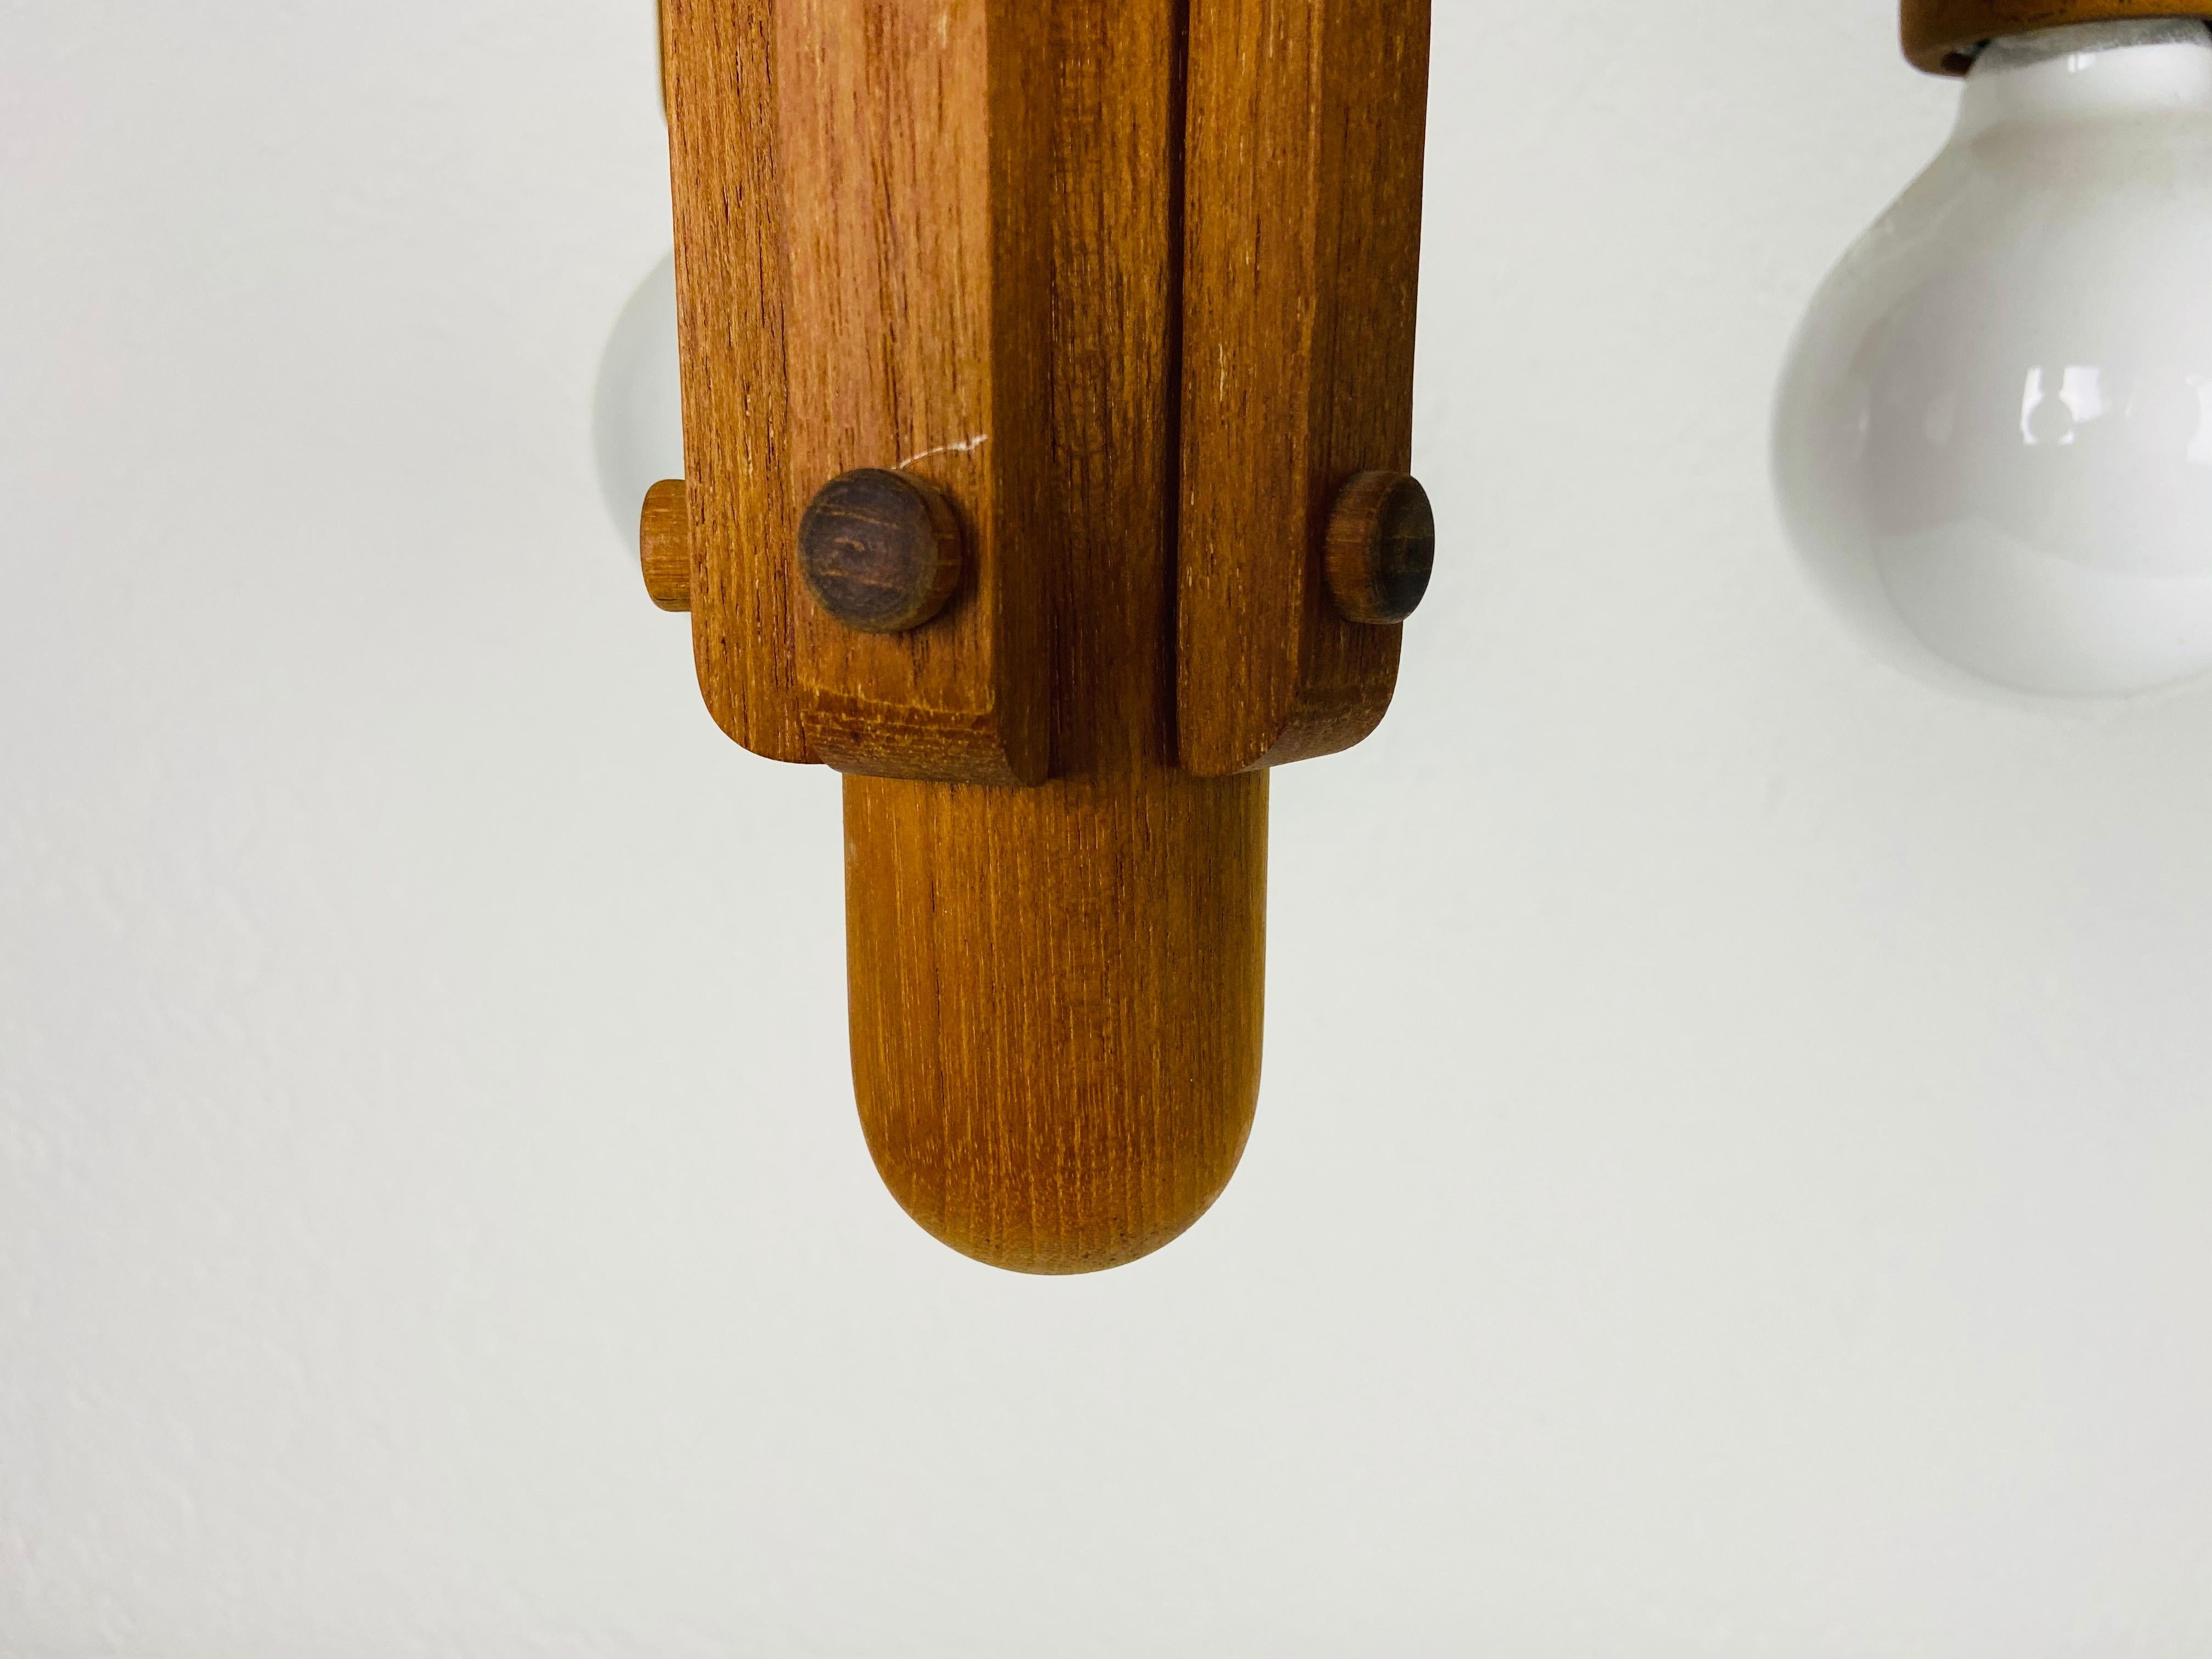 German Midcentury Teak Pendant Lamp with 5 Arms by Domus, 1960s